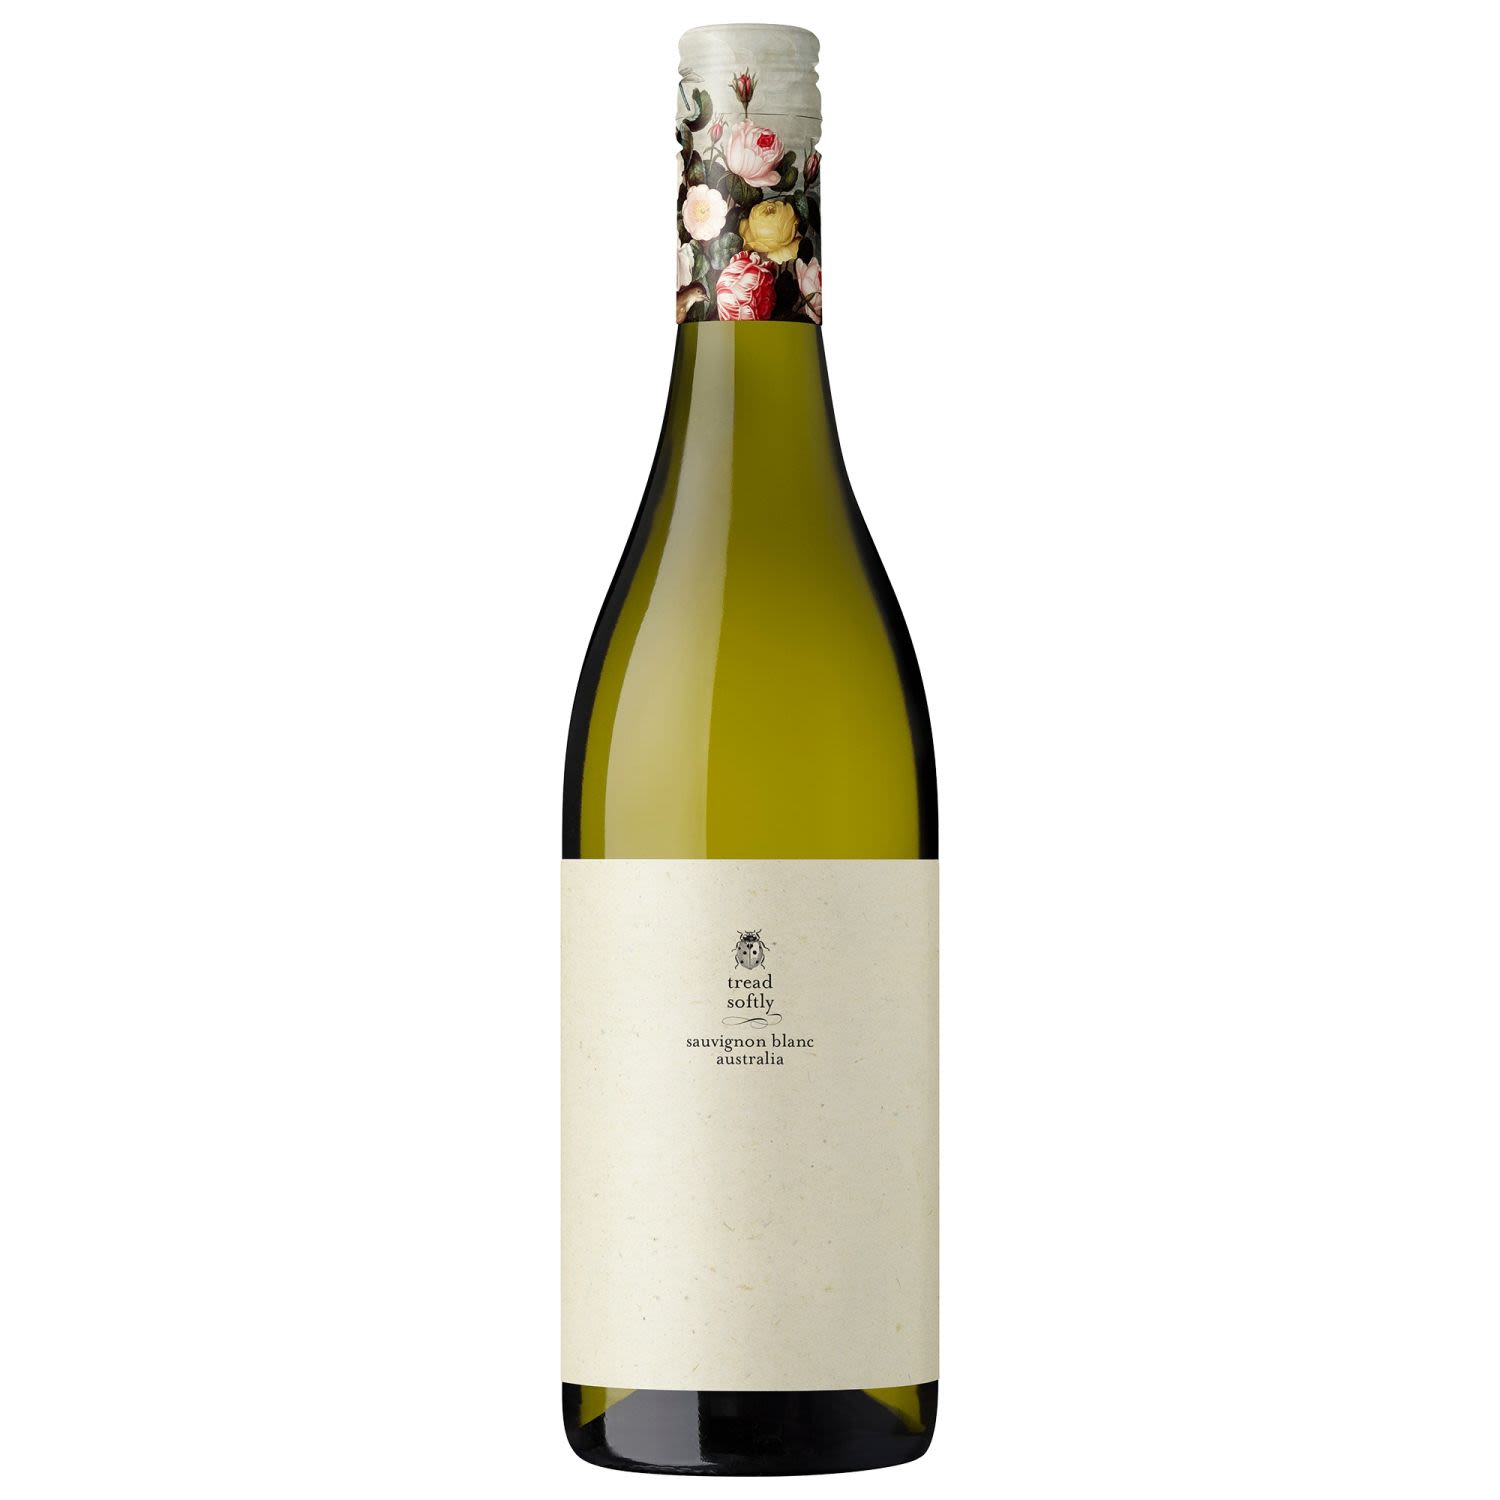 Tread Softly Sauvignon Blanc is a delightfully fresh & dry wine with a lively palate showing passion flower & tropical flavours. There is excellent acid zip here with a fresh dry, citrus finish.<br /> <br />Alcohol Volume: 10.00%<br /><br />Pack Format: Bottle<br /><br />Standard Drinks: 5.9</br /><br />Pack Type: Bottle<br /><br />Country of Origin: Australia<br /><br />Region: n/a<br /><br />Vintage: Vintages Vary<br />